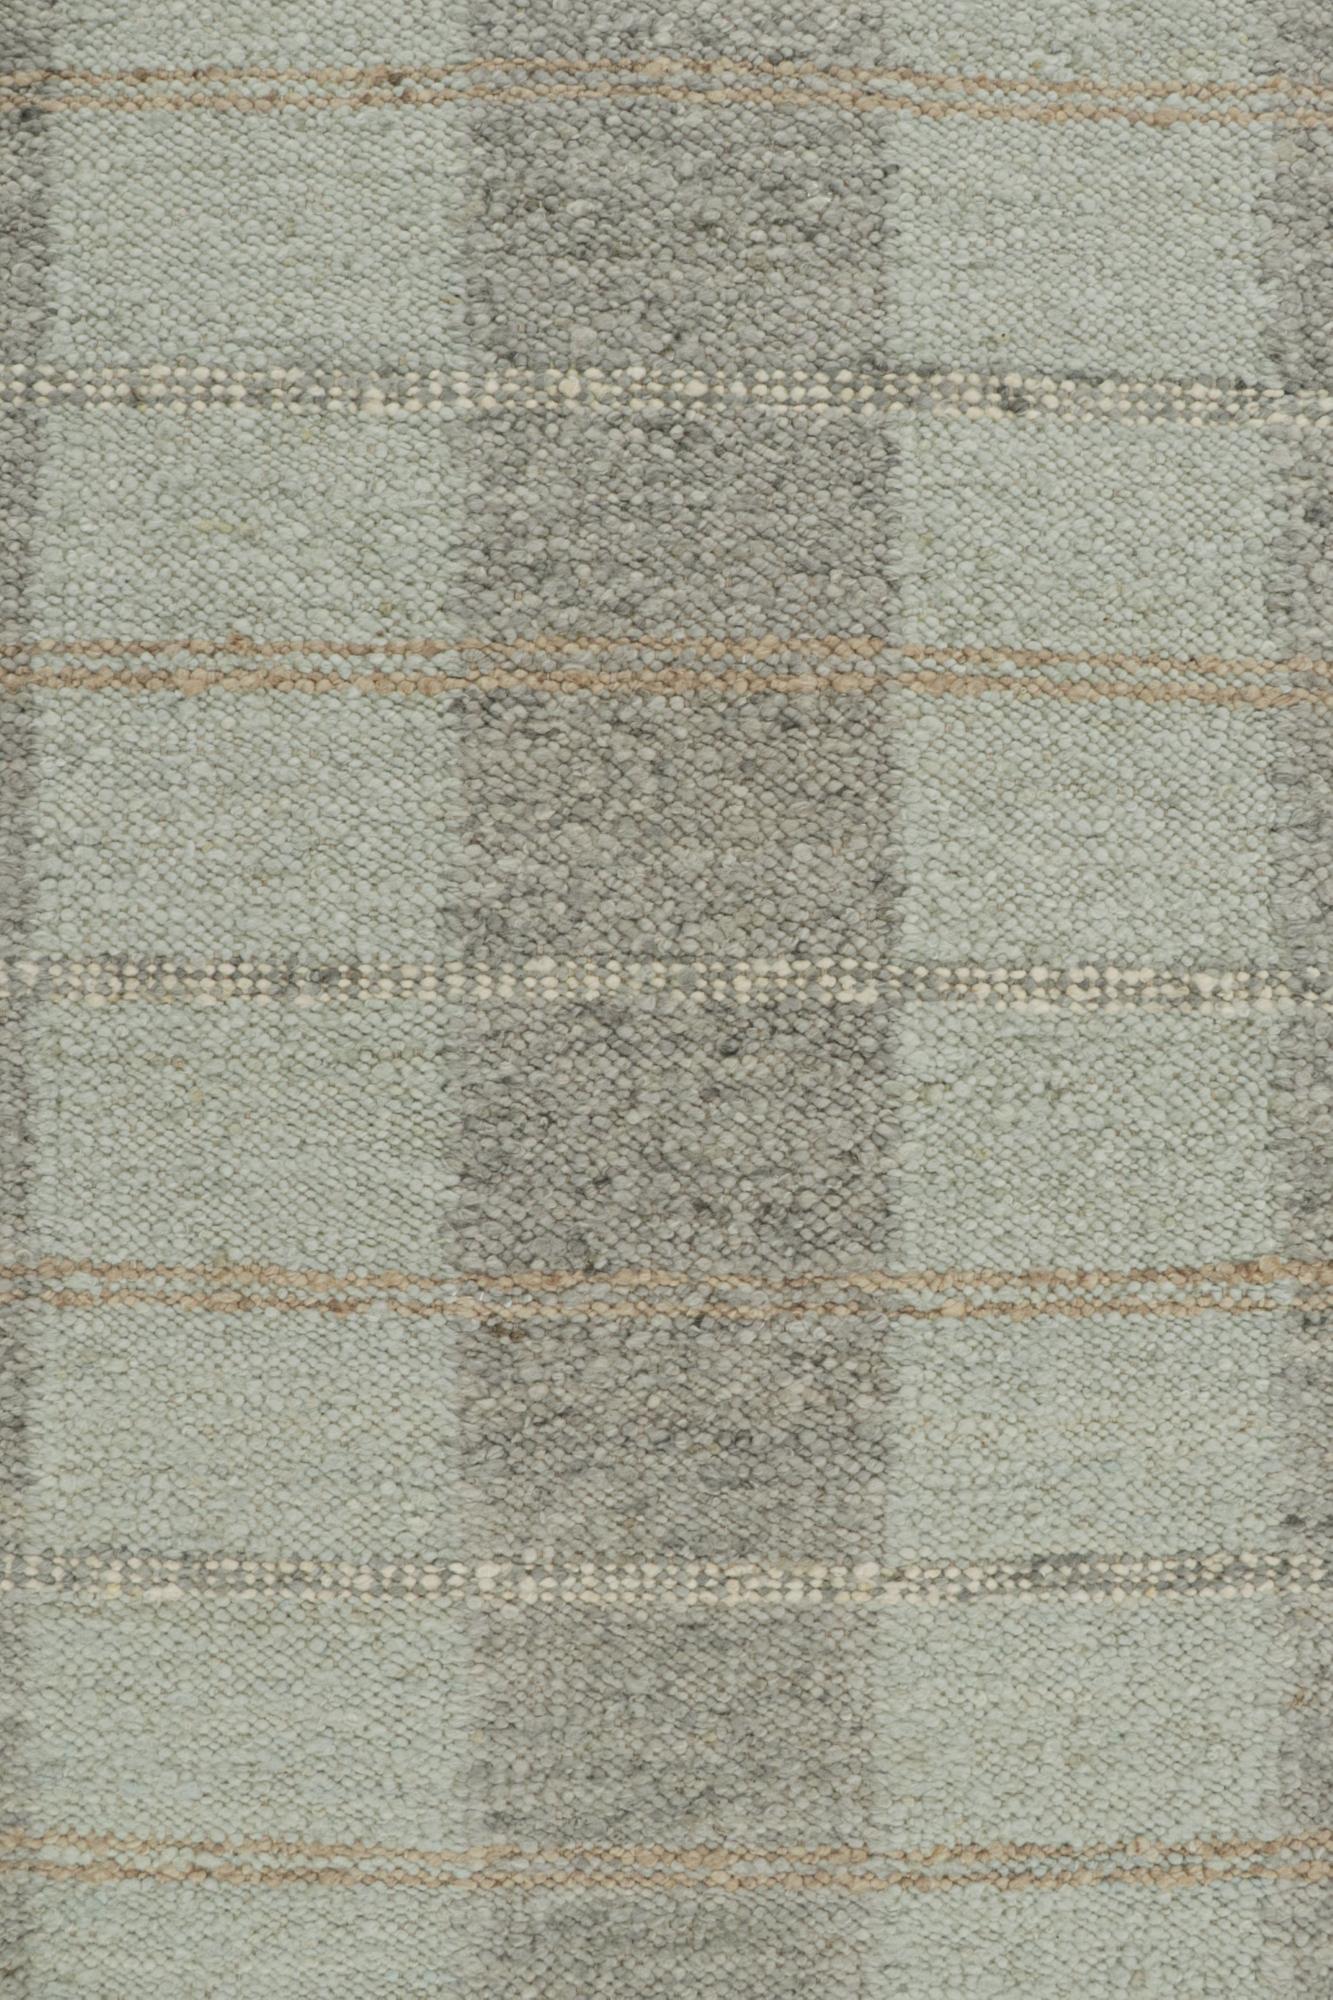 Rug & Kilim’s Scandinavian Style Kilim in Blue & Gray Geometric Patterns In New Condition For Sale In Long Island City, NY